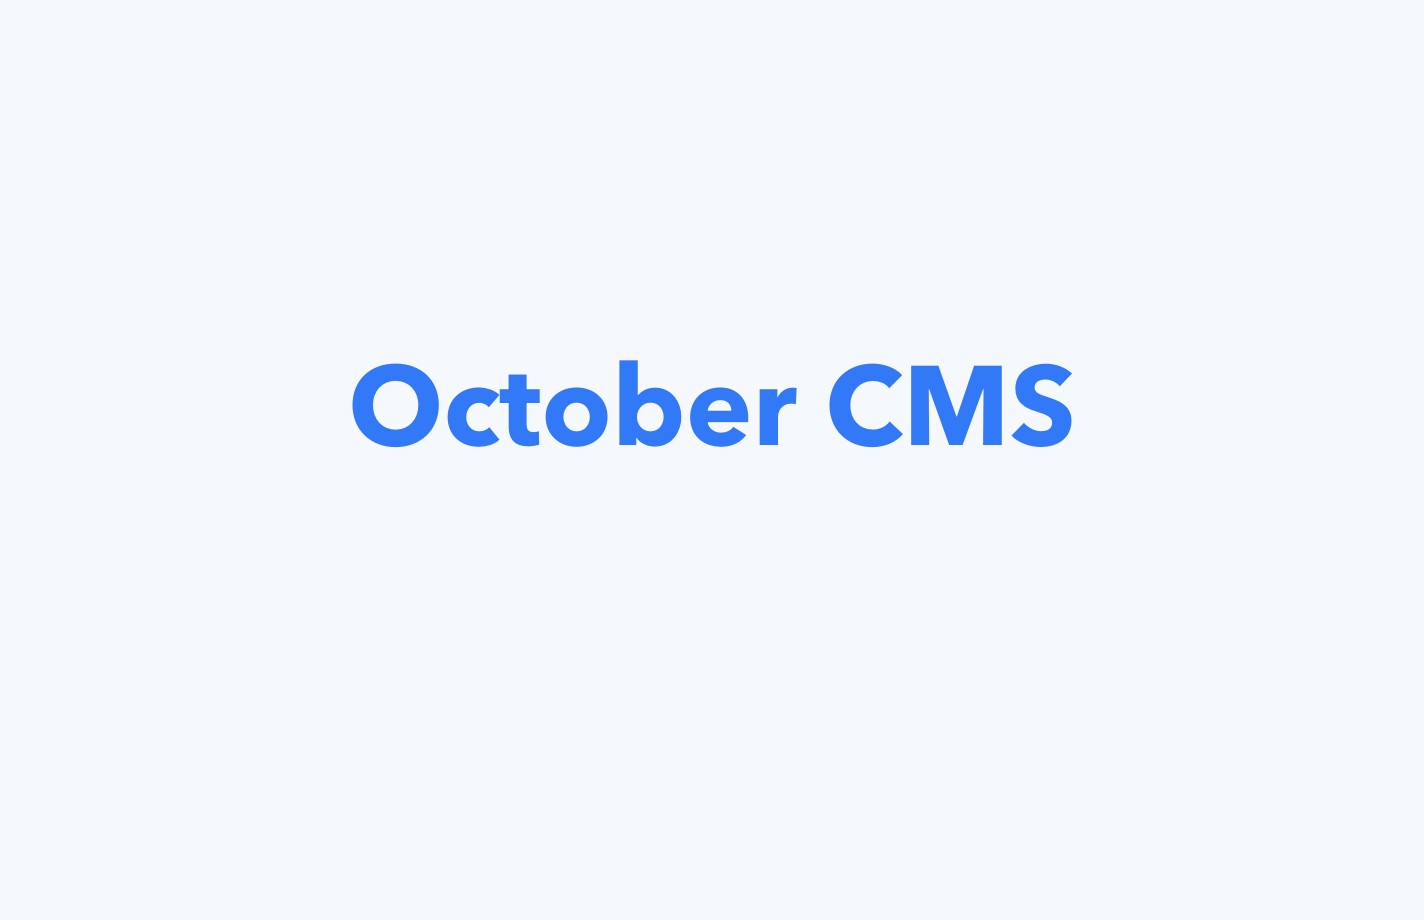 What is October CMS?